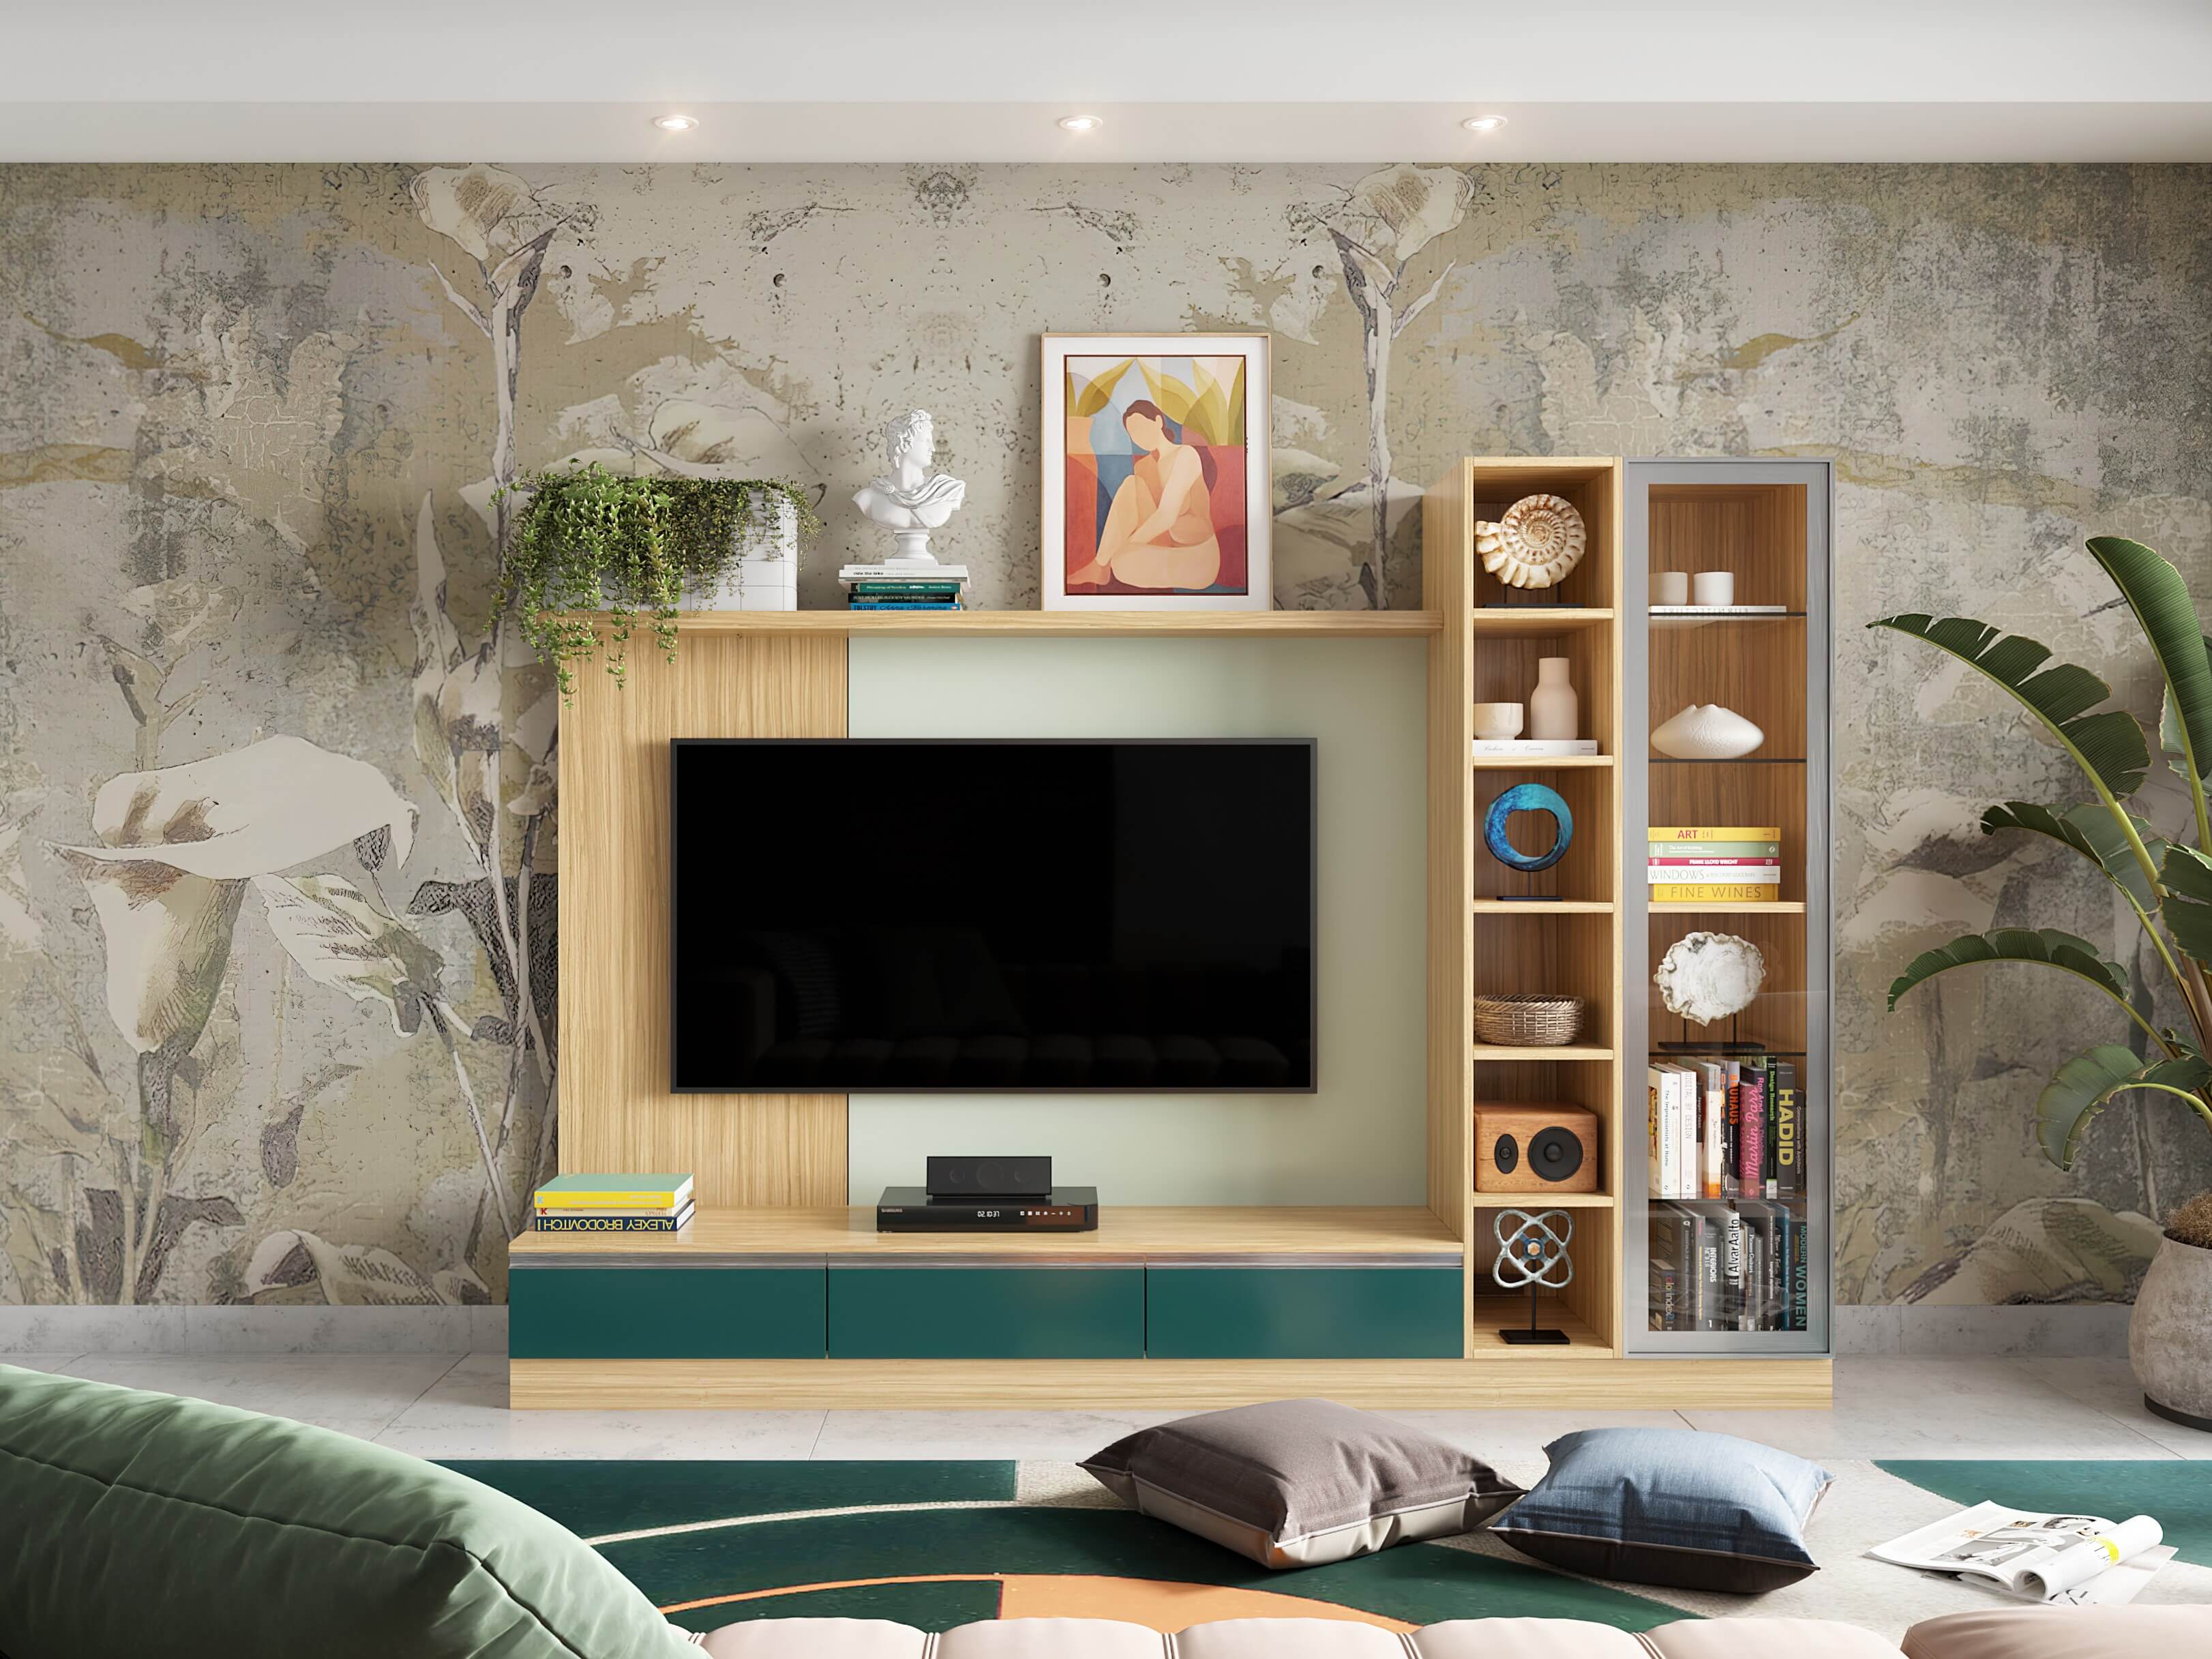 The classic light-wood TV unit design ideas for your living room - Beautiful Homes